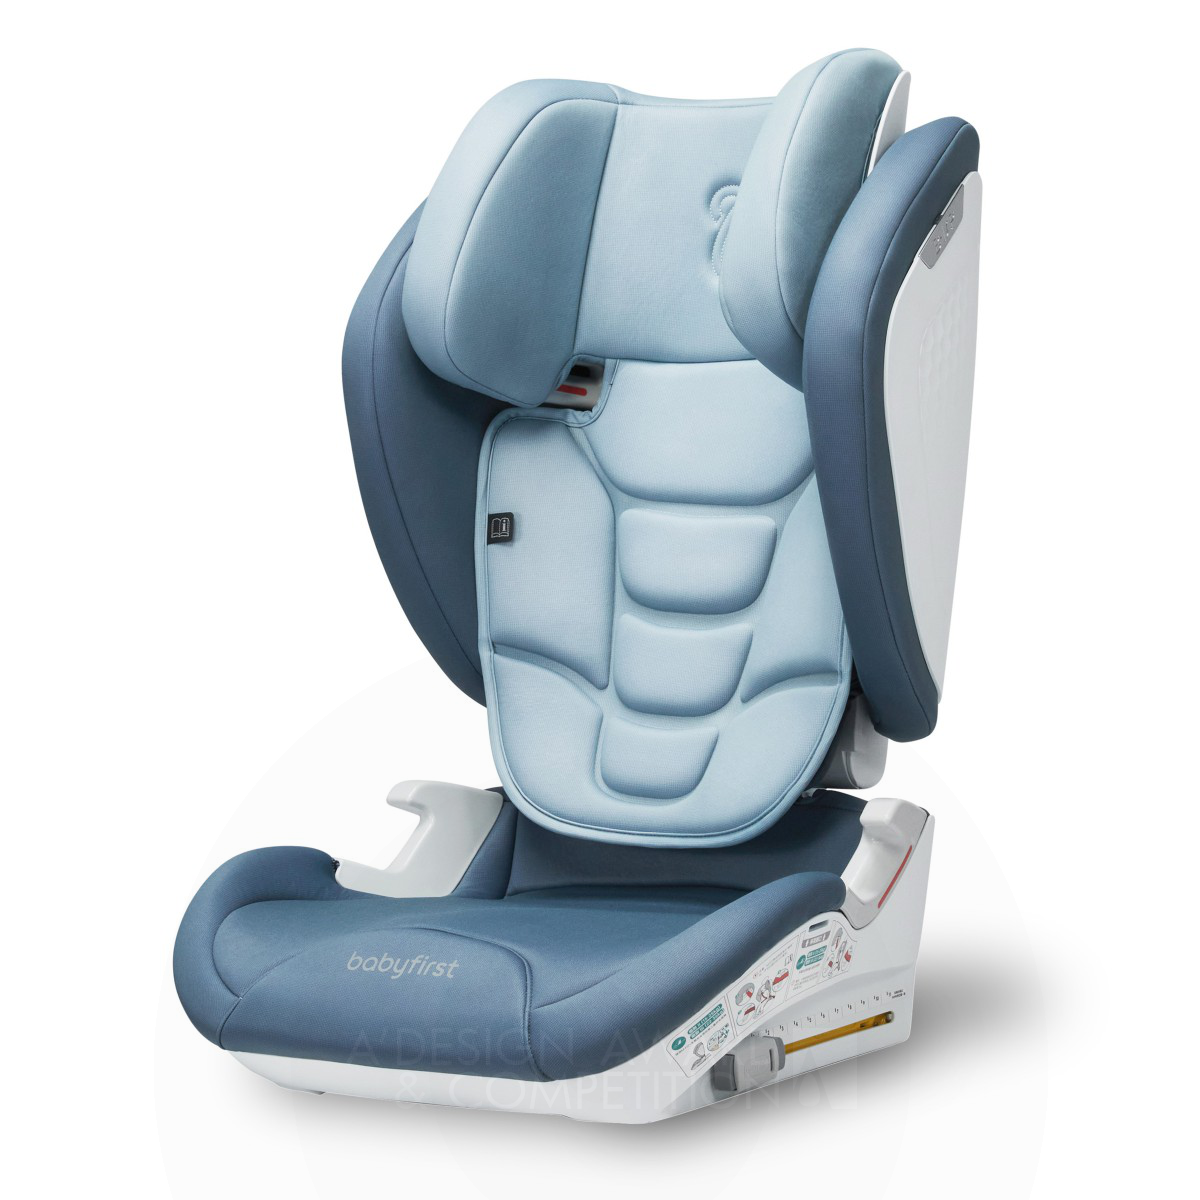 Ningbo Baby First Baby Products Co., Ltd wins Silver at the prestigious A' Baby, Kids and Children's Products Design Award with Babyfirst Q R943 Baby Car Seat.